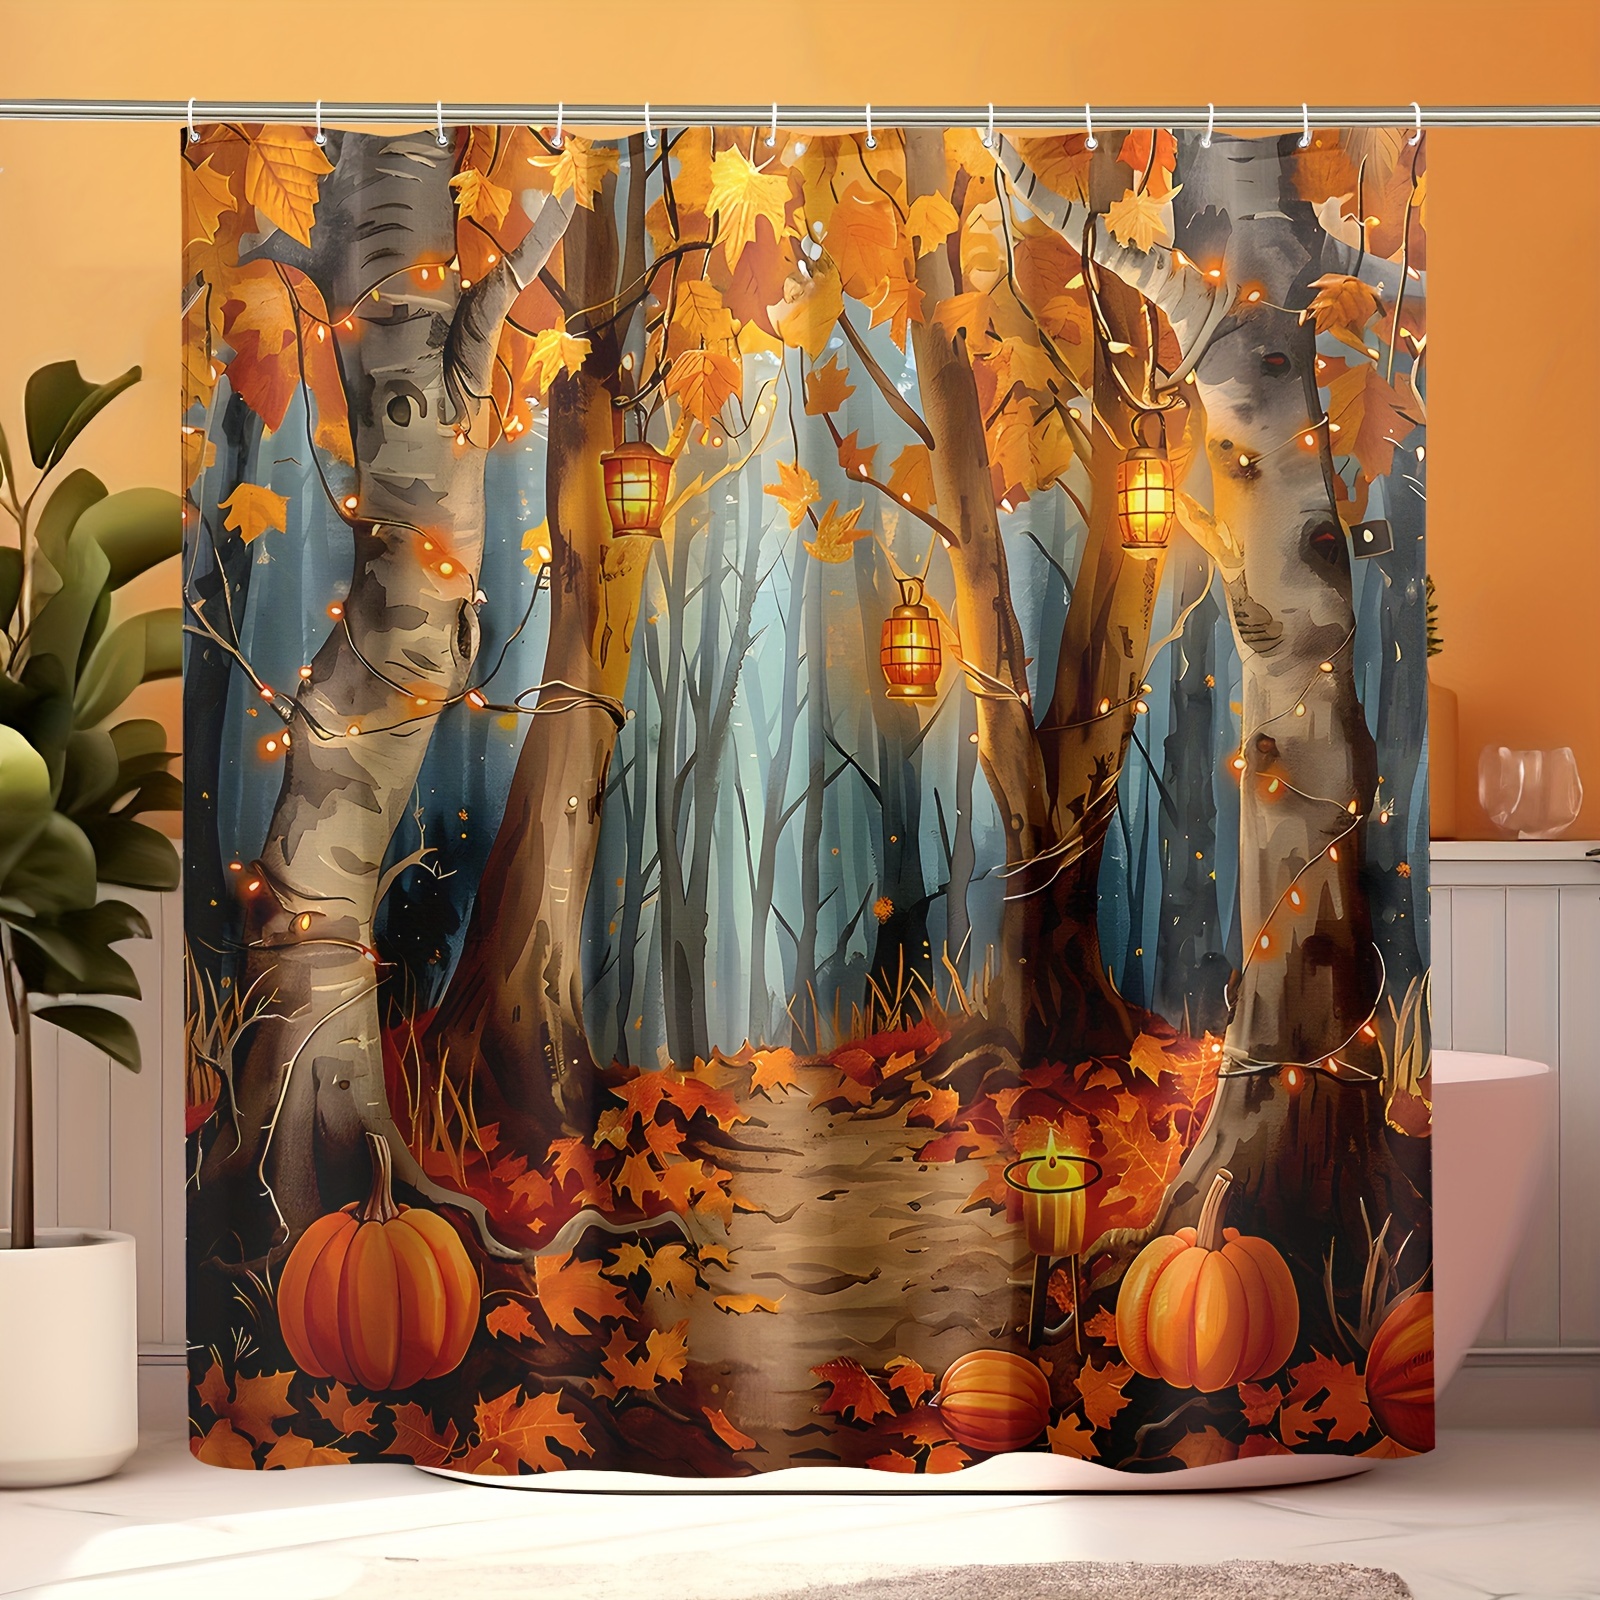 

1pc Forest Scene Fall Shower Curtain Pumpkin Maple Burnt Yellow Shower Curtains Waterproof Polyester 71*71 Inch With 12 Hooks Machine Washable Fall Shower Curtain For Bathroom Or Bathtub Decorative